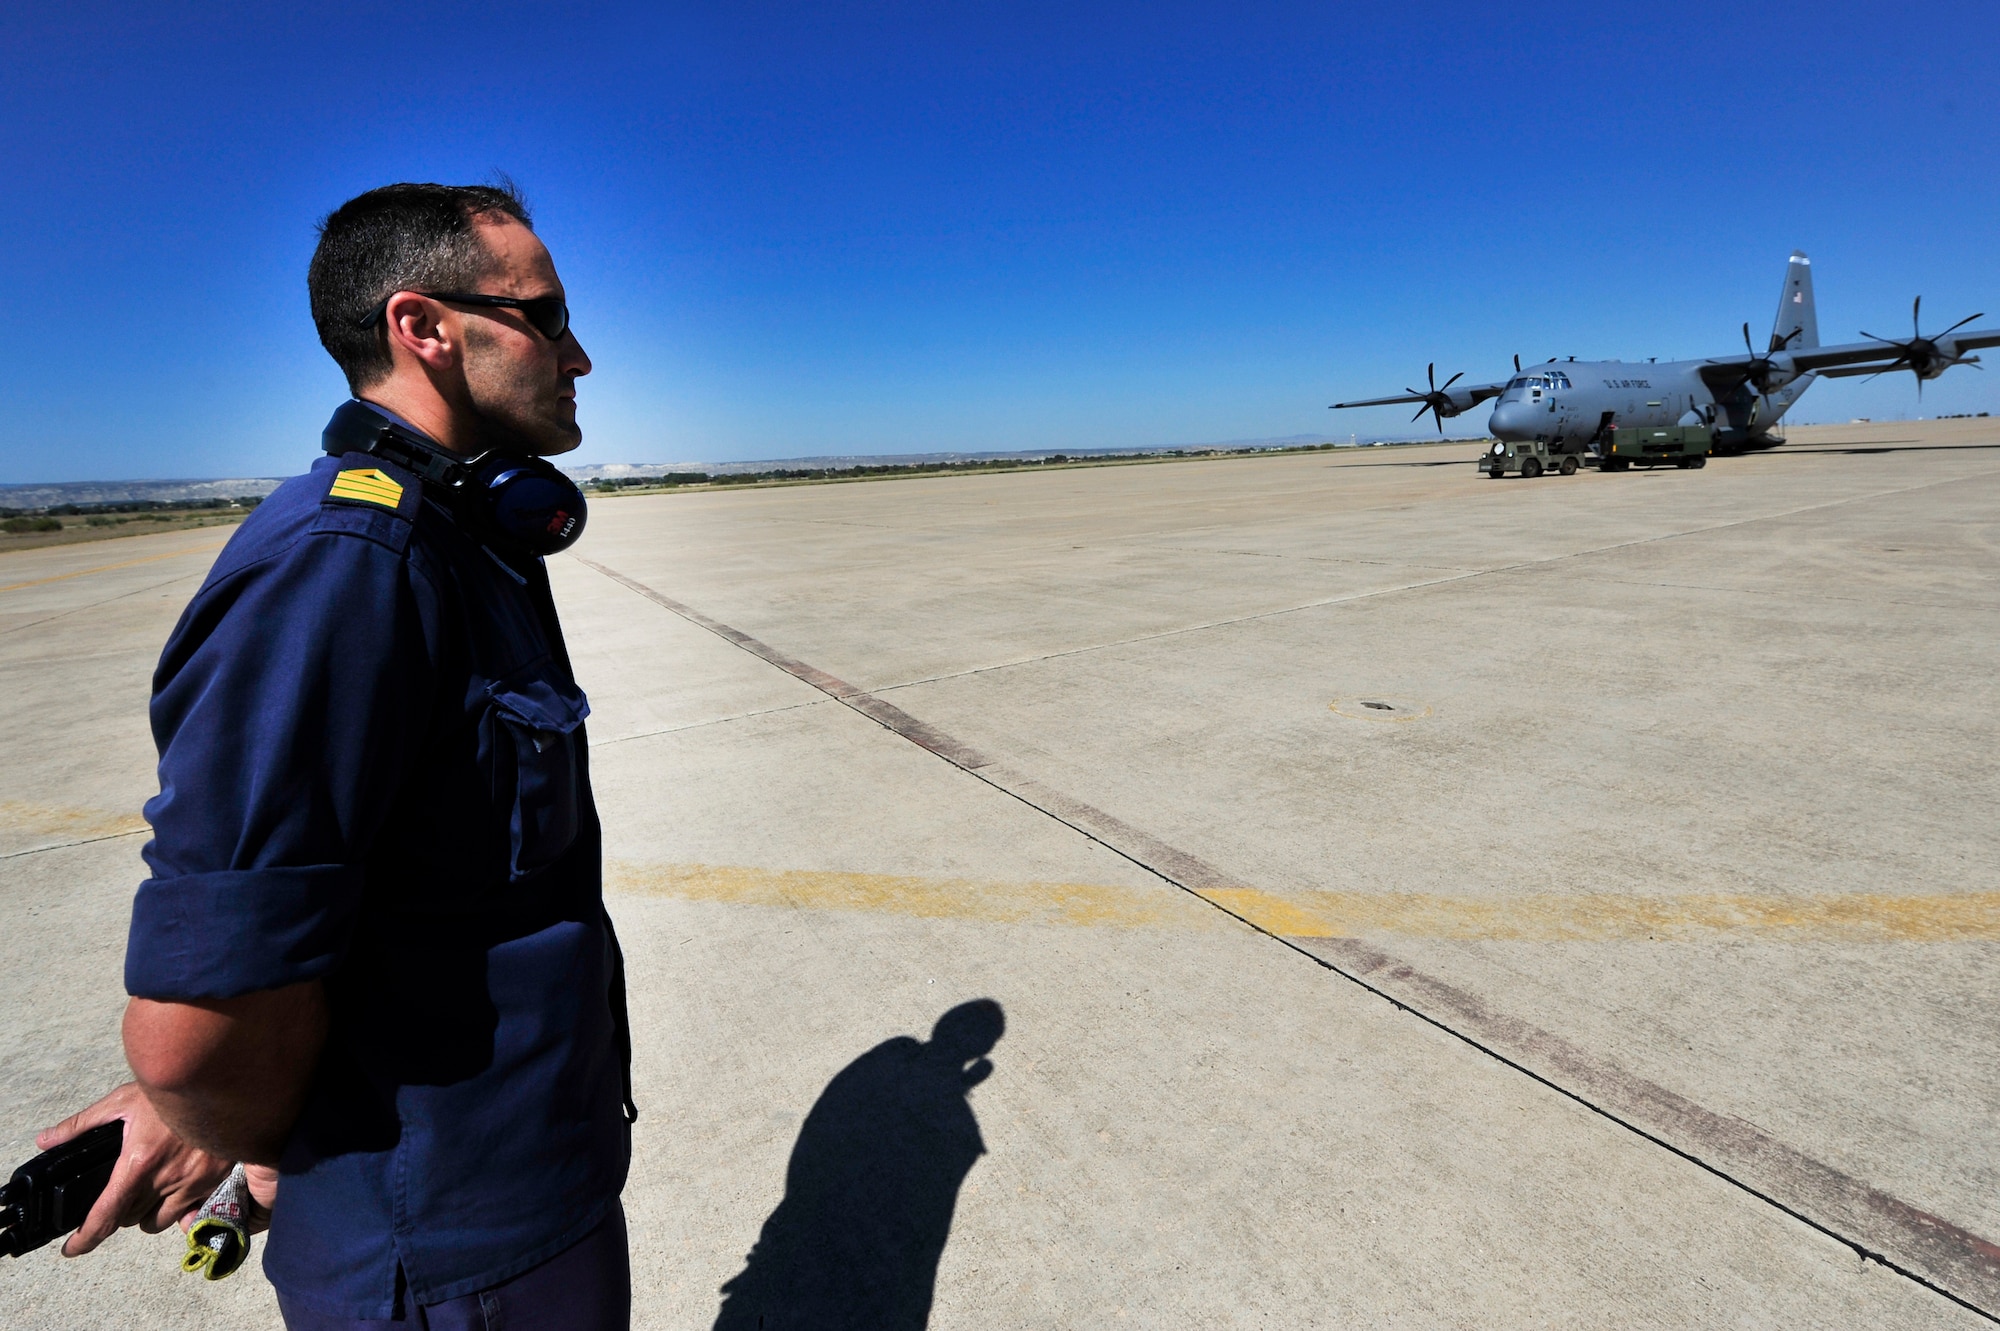 Spanish Air Force, Master Sgt. Javier Rodriguez Celada, 31st Wing C-130 mechanic, stands-by while U.S. Airmen perform start-up checks on a C-130J prior to the space shuttle launch, July 8, 2011, Zaragoza Air Base, Spain.  As space shuttle Atlantis makes it's final launch into orbit, personnel from DoD, NASA, and the Spanish Air Force work together to prepare for a possible emergency landing at the Transoceanic Abort Landing Site, Zaragoza Air Base, Spain. This particular TAL is one of three primary landing sites within U.S. Air Forces Europe, and this is the 135th mission the U.S. military has supported.(U.S. Air Force photo by Tech. Sgt. Chenzira Mallory)